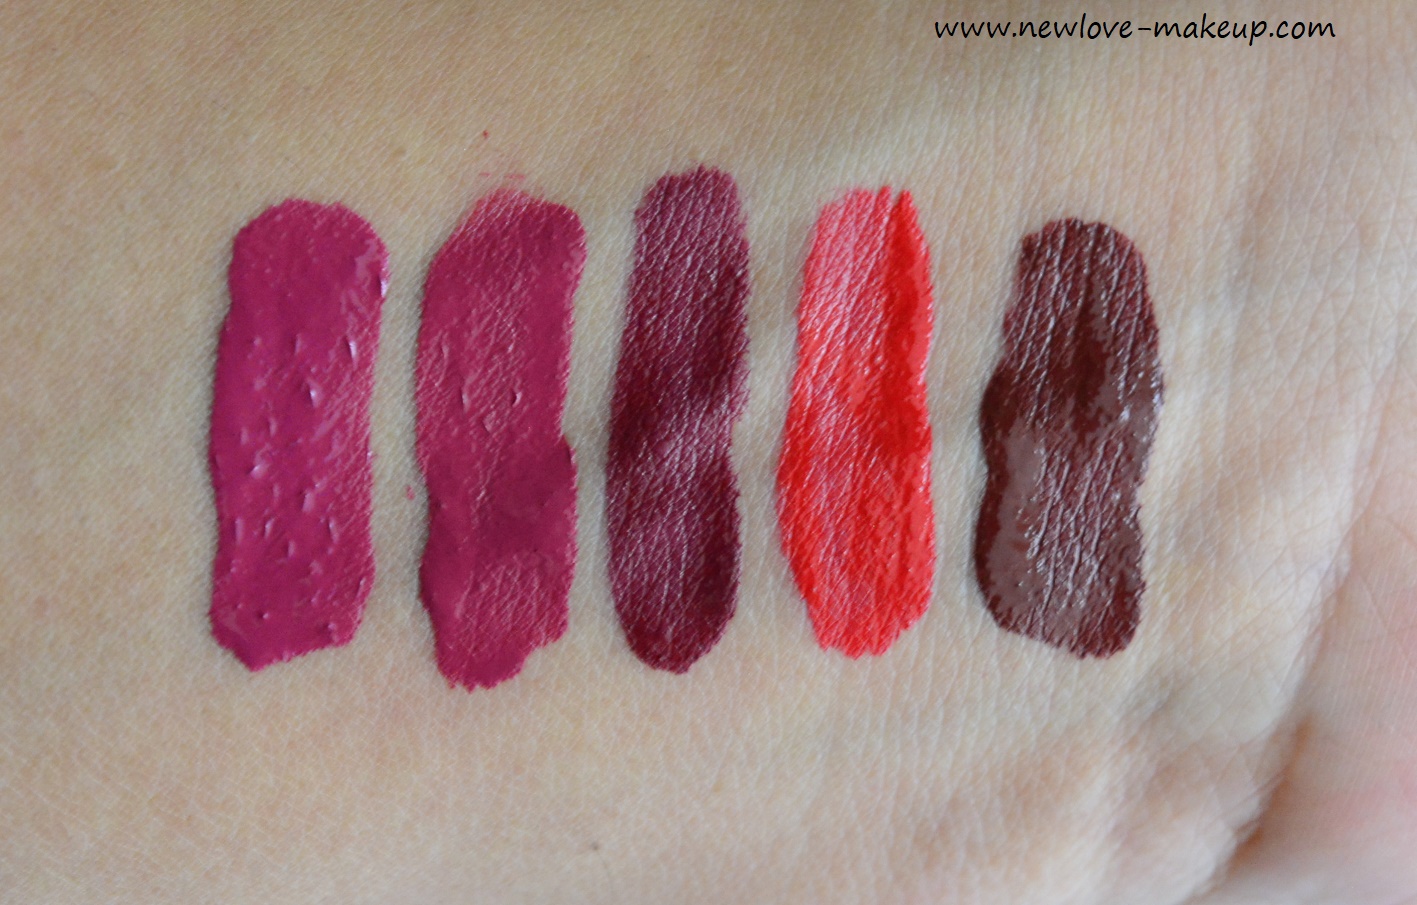 Swatches - 10 New Shades 11 to 20 of Sugar Suede Secret Lip Colours